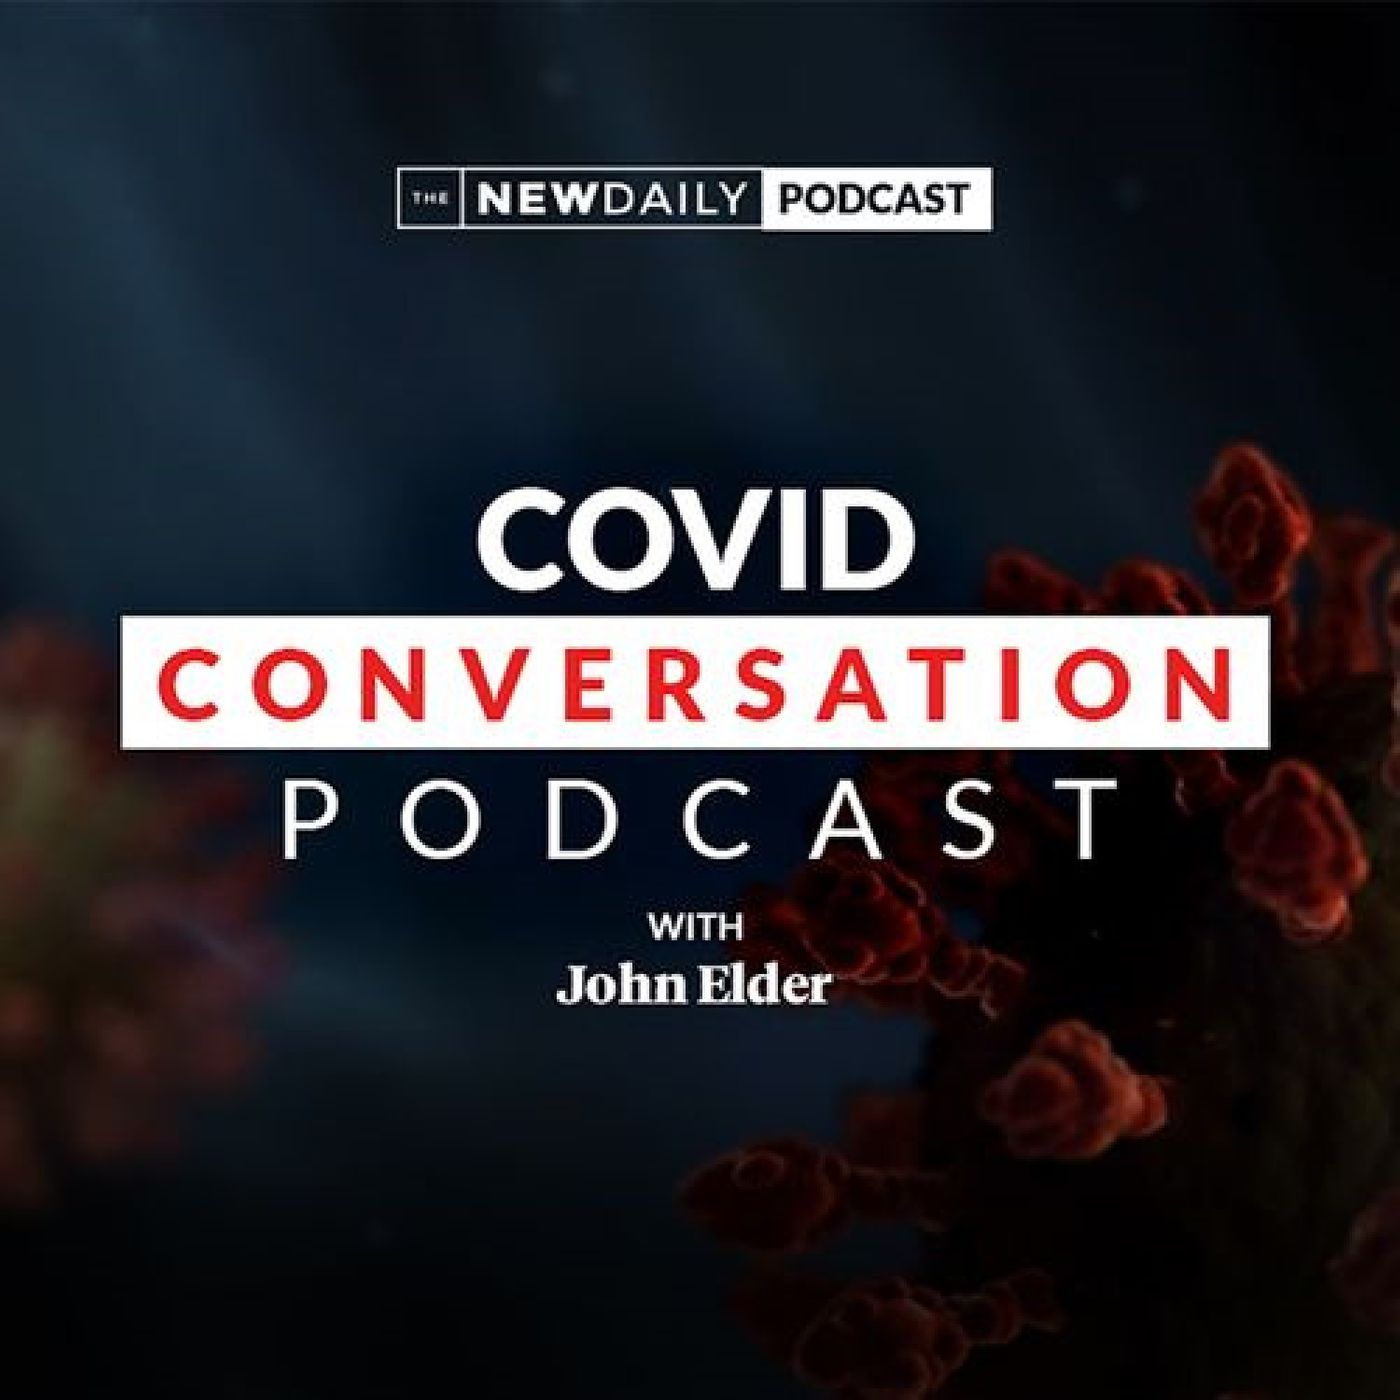 Where our police go wrong - The COVID Conversation